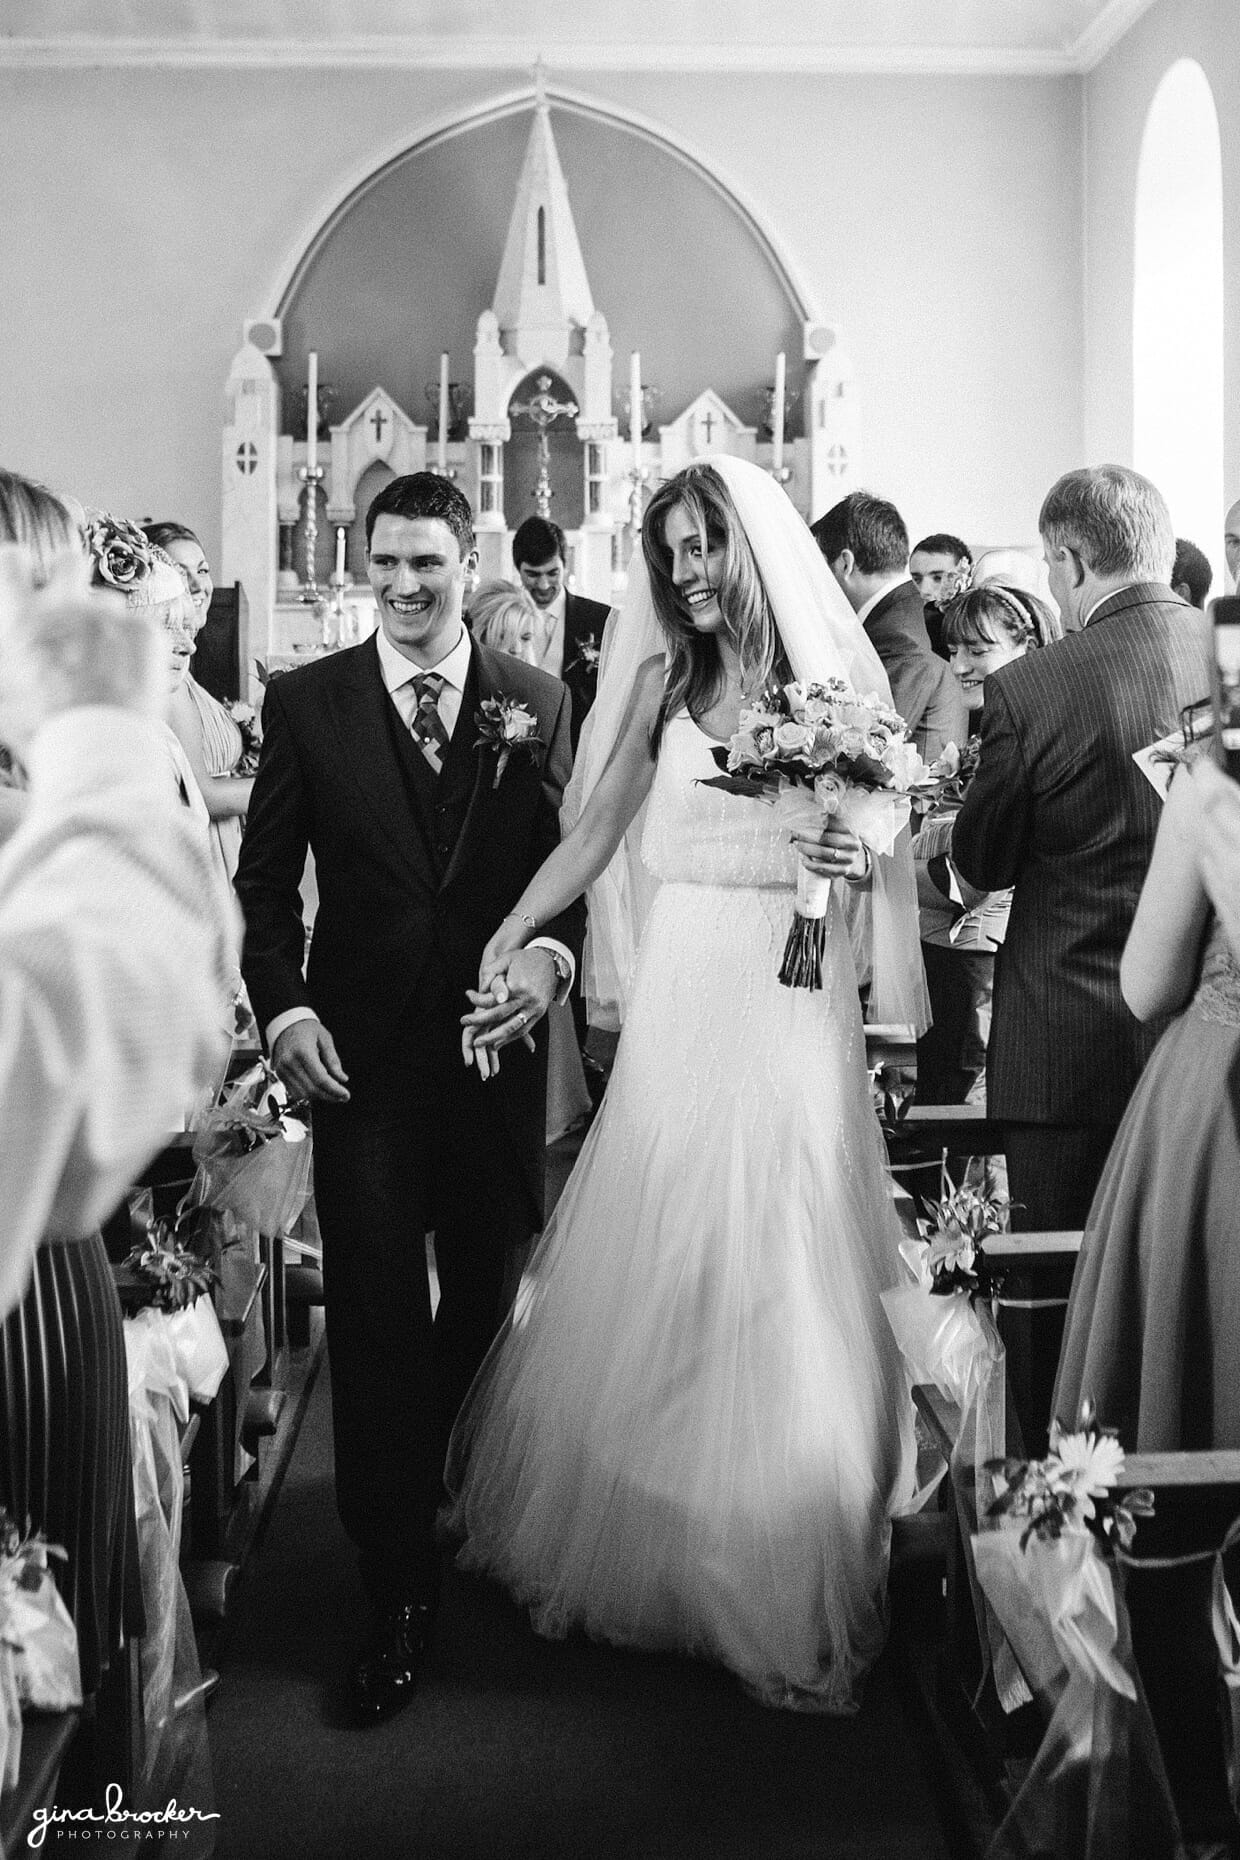 The bride and groom walk down the aisle as husband and wife